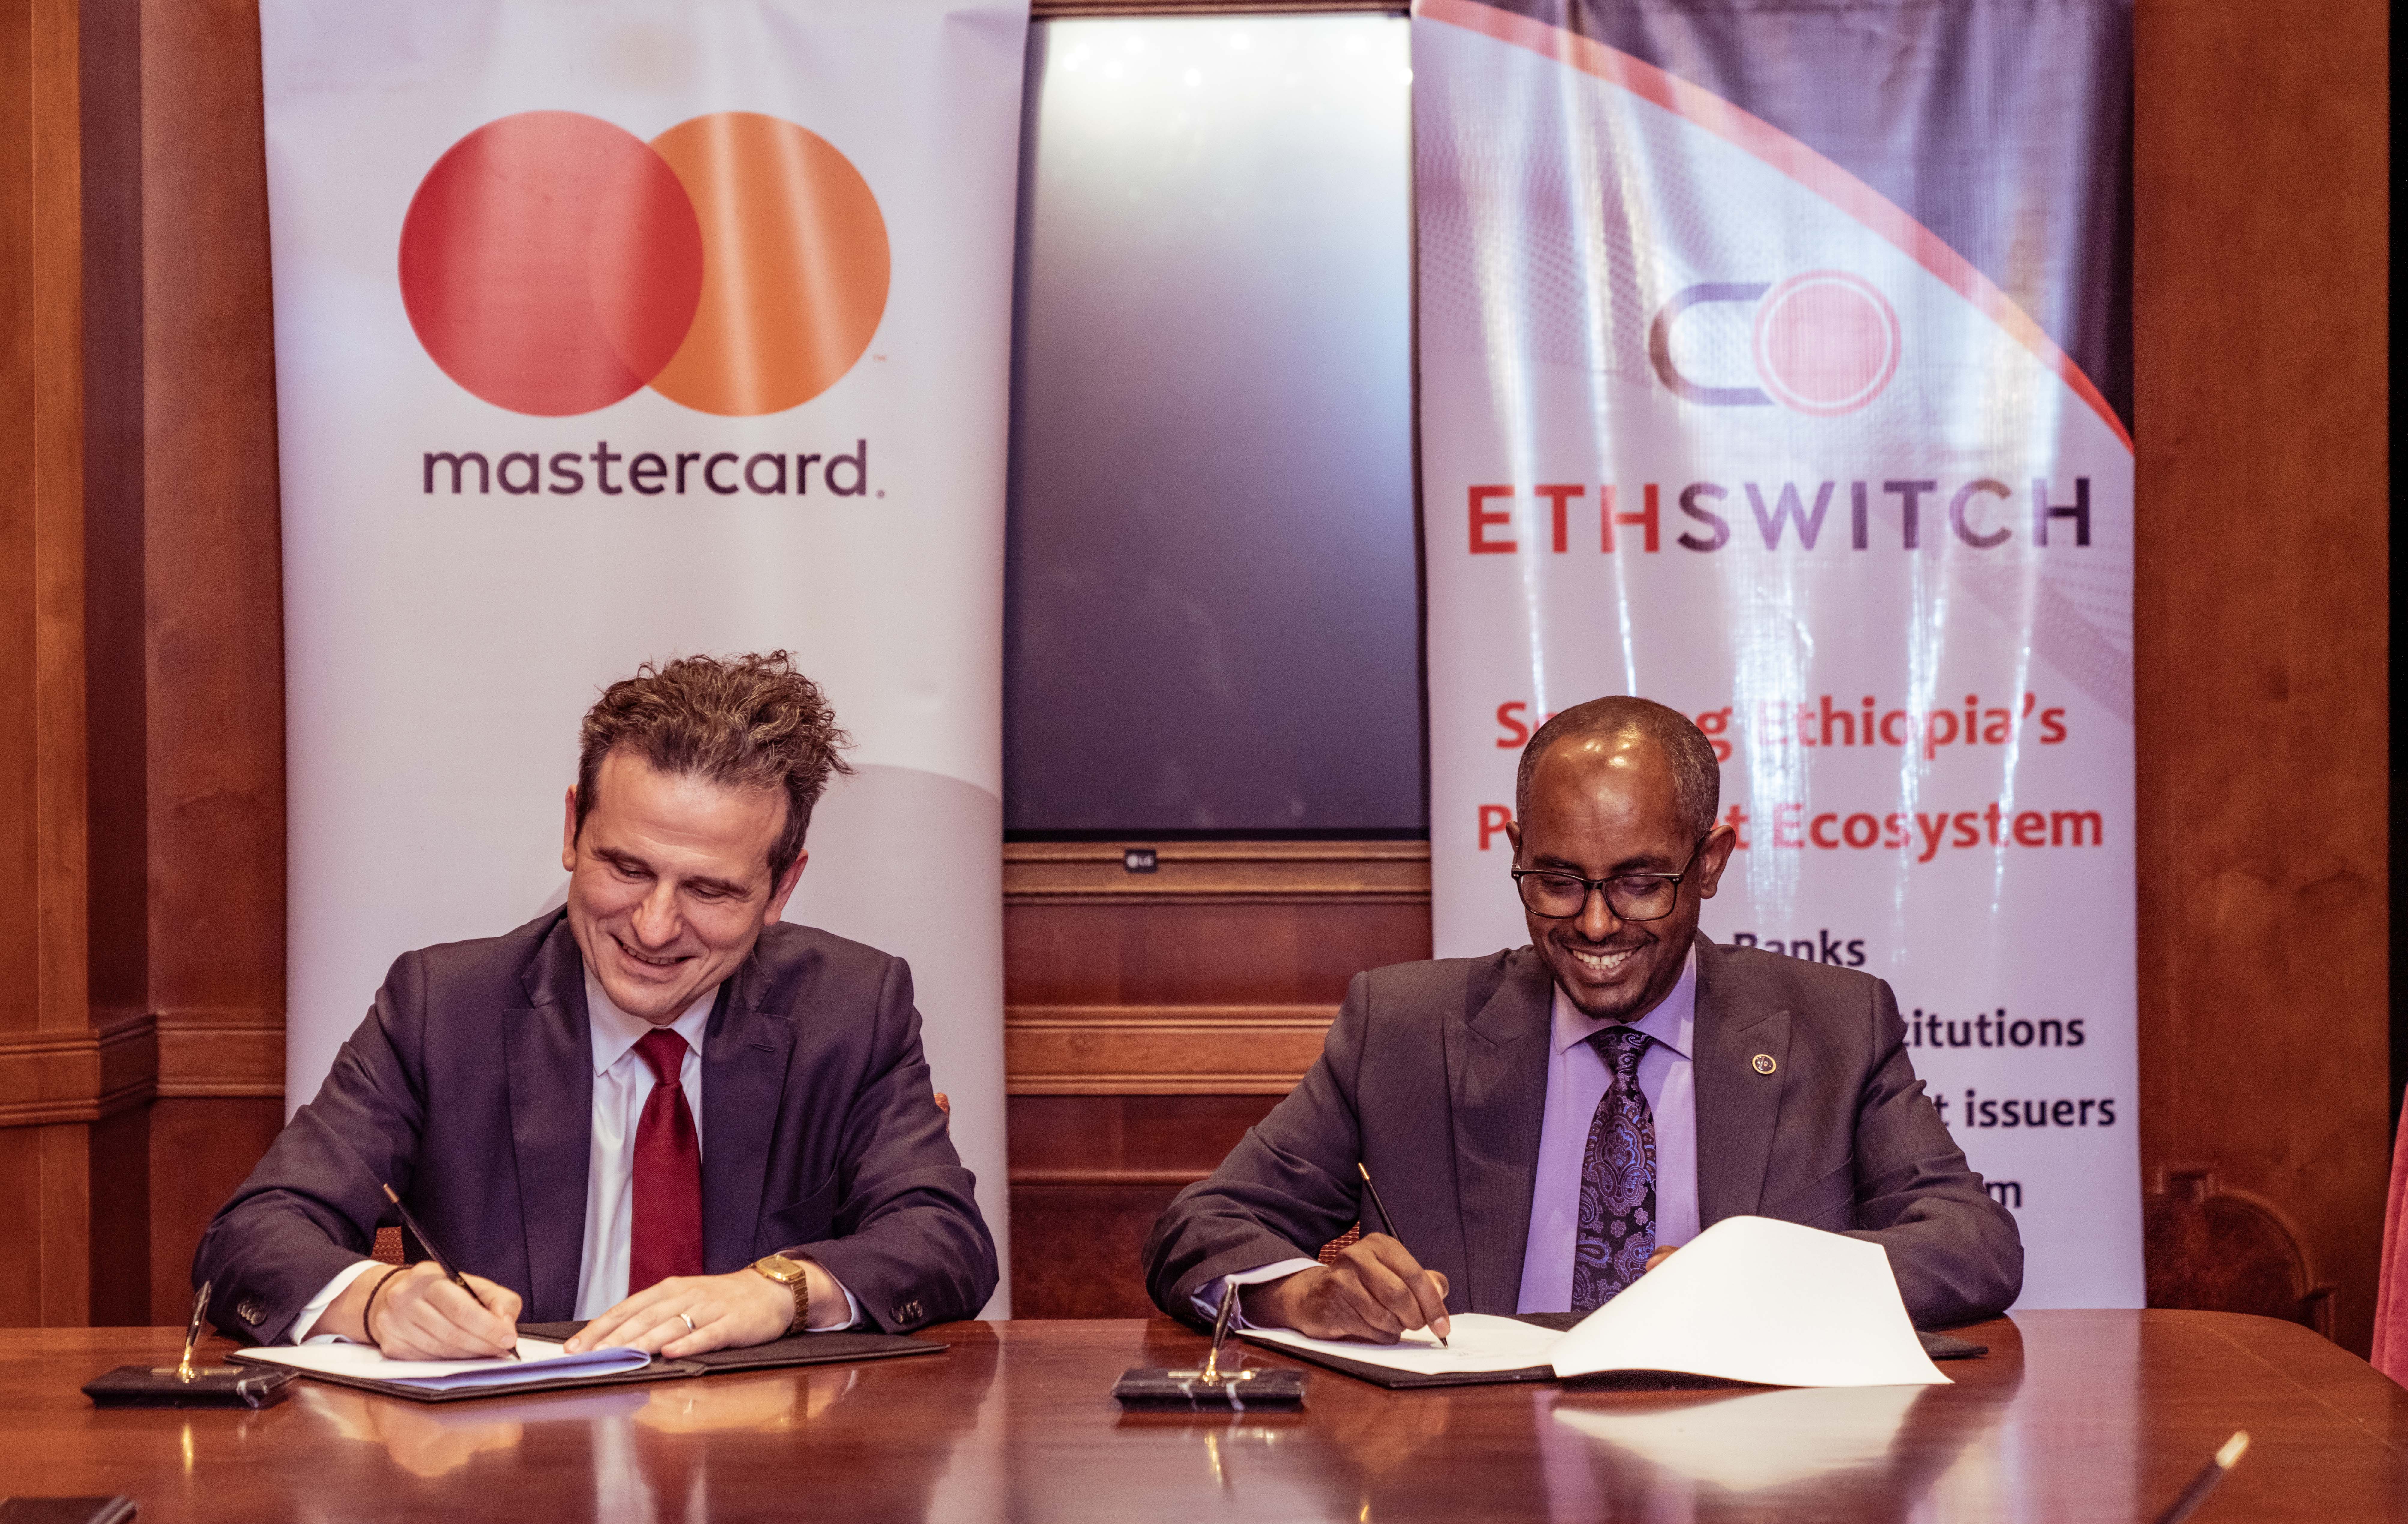 Dimitrios Dosis, President for Eastern Europe, Middle East and Africa at Mastercard and Yilebes Addis, Chief Executive Officer at EthSwitch during the signing ceremony in Addis Ababa, Ethiopia.